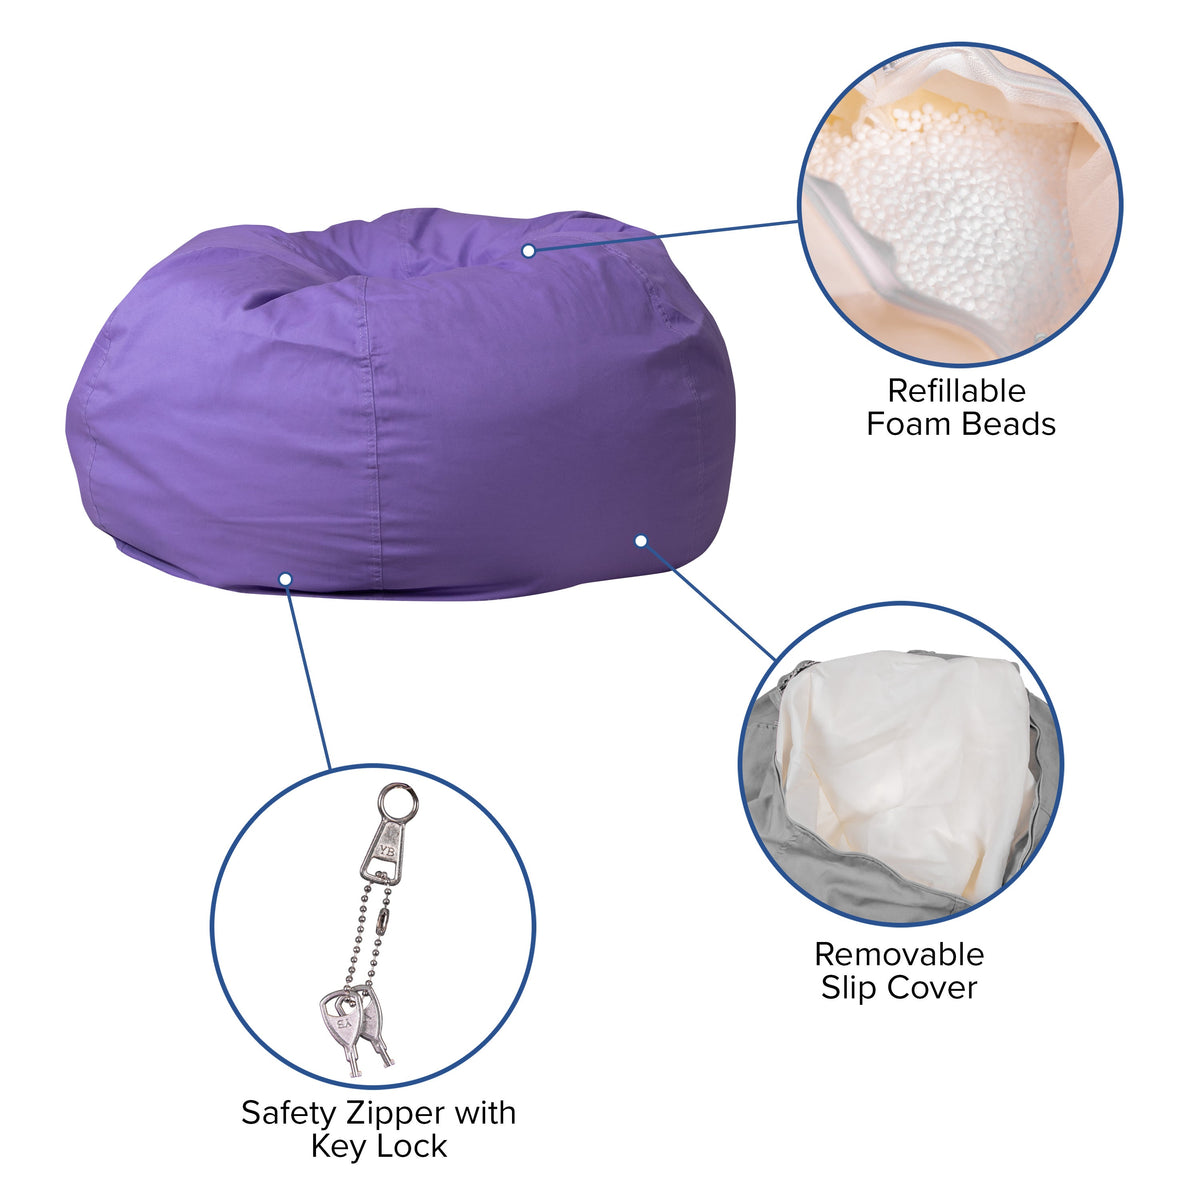 Purple |#| Oversized Solid Purple Refillable Bean Bag Chair for All Ages